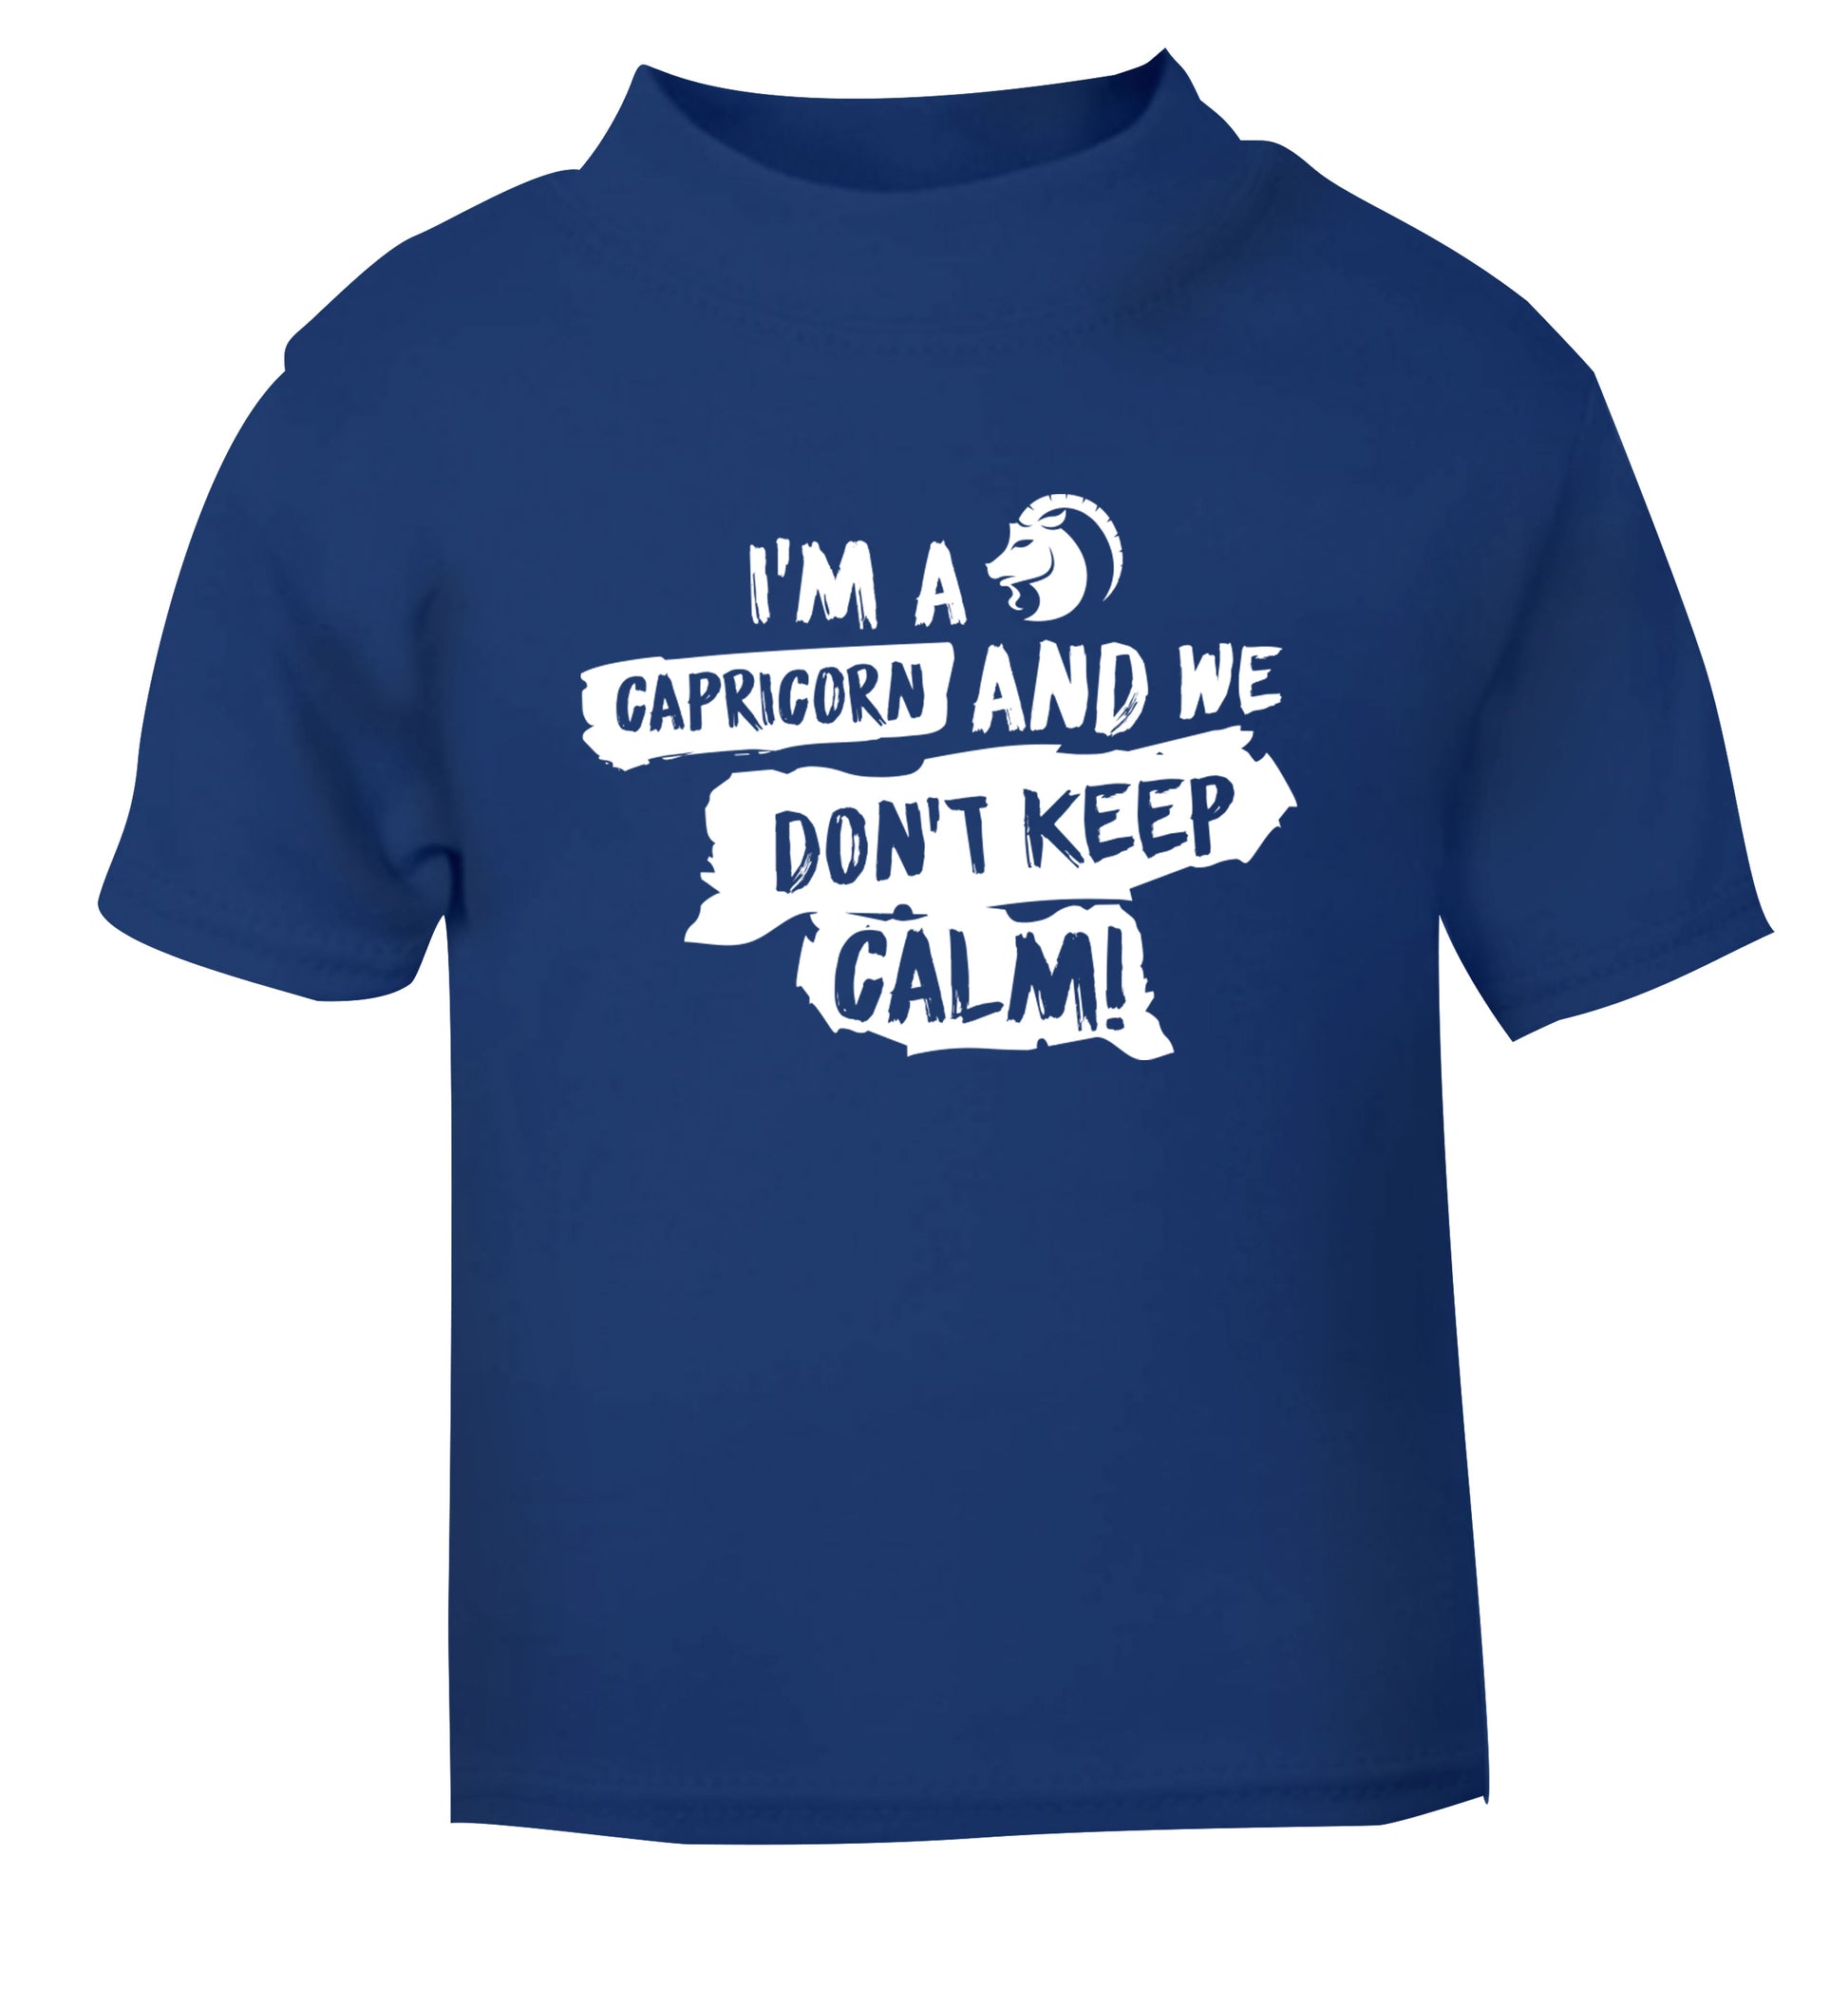 I'm a capricorn and we don't keep calm blue Baby Toddler Tshirt 2 Years